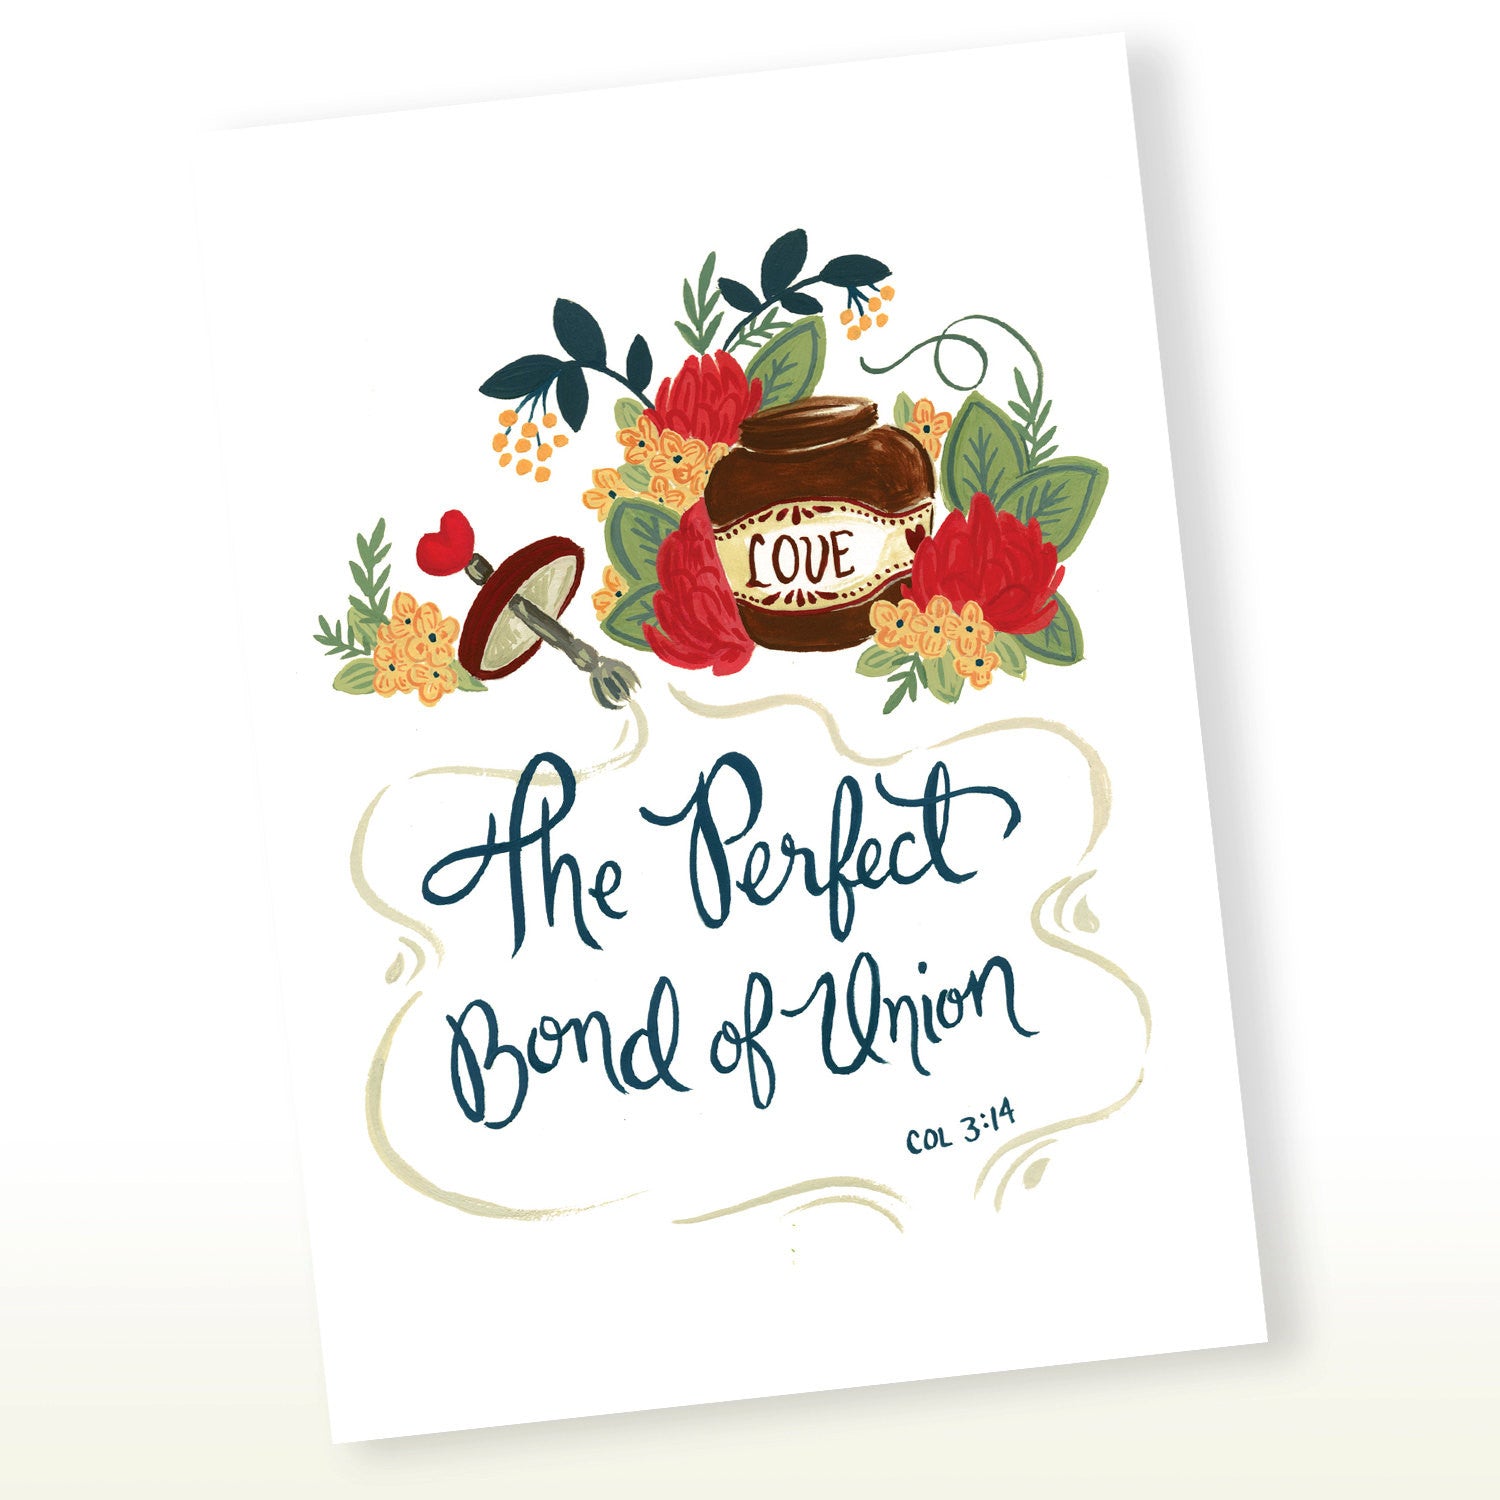 Love - The Perfect Bond of Union - Colossians 3:14 Greeting Card